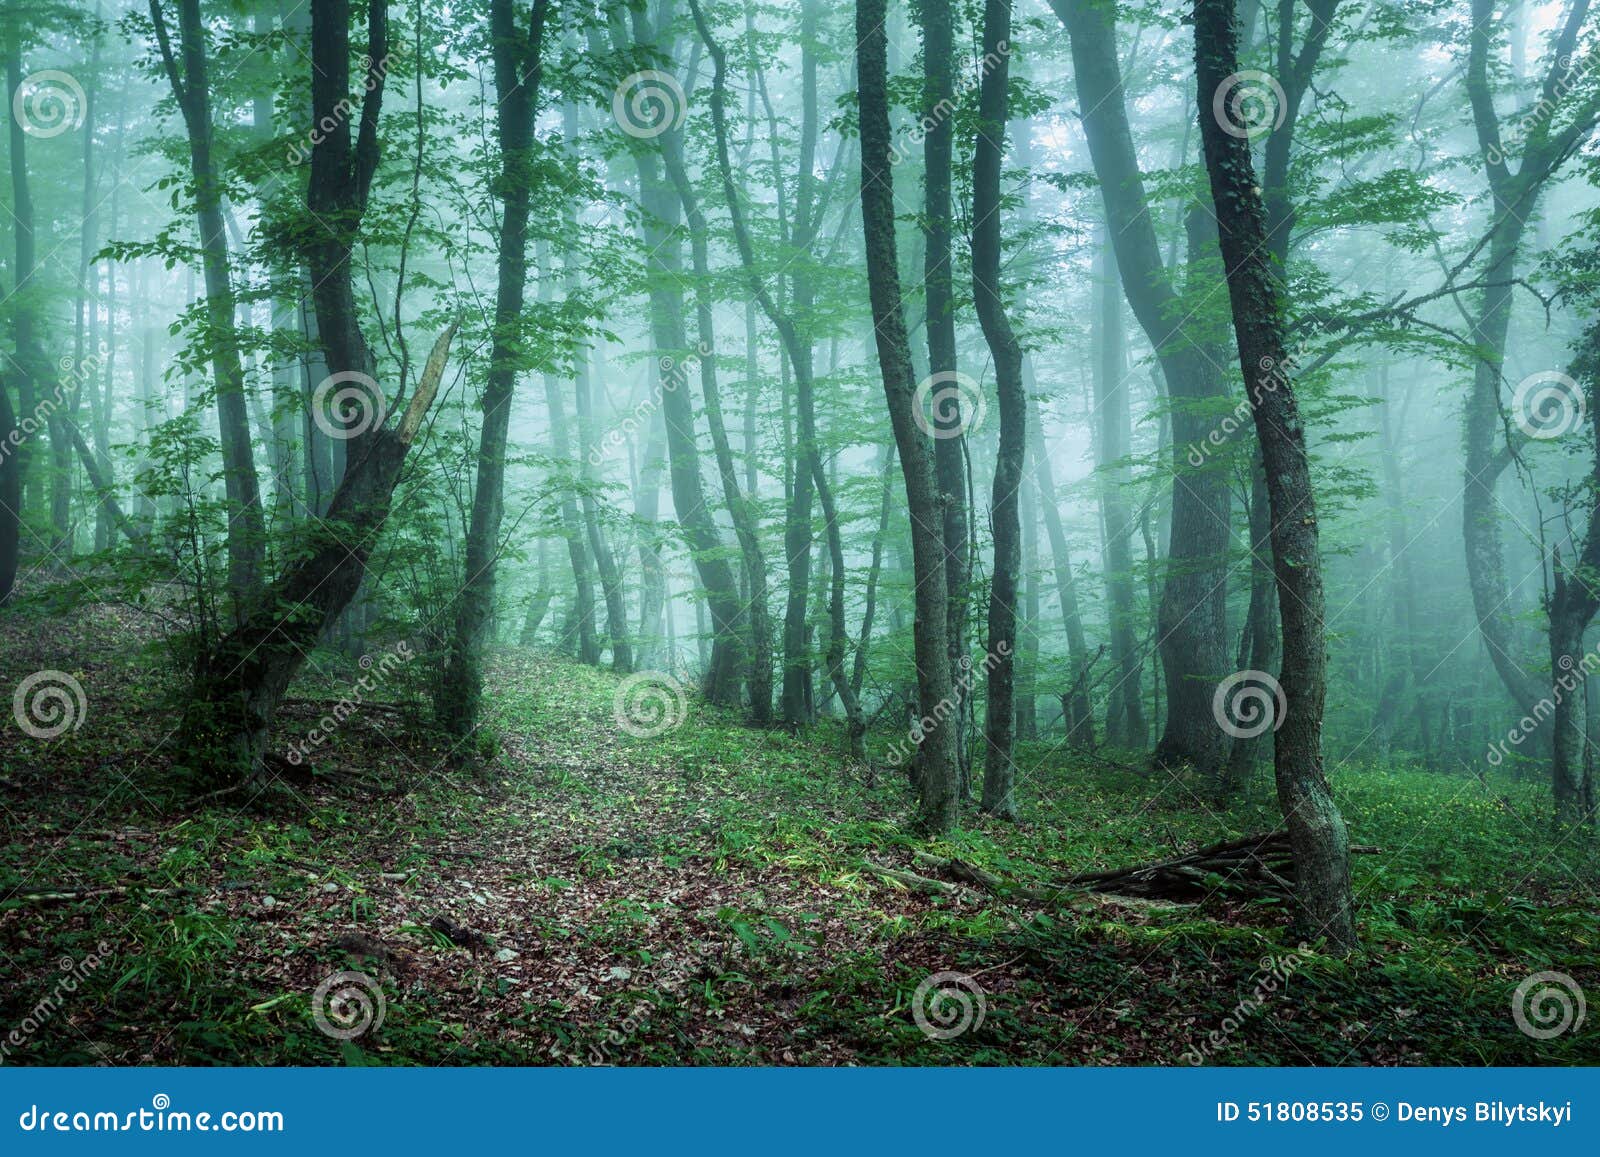 trail through a mysterious dark forest in fog with green leaves